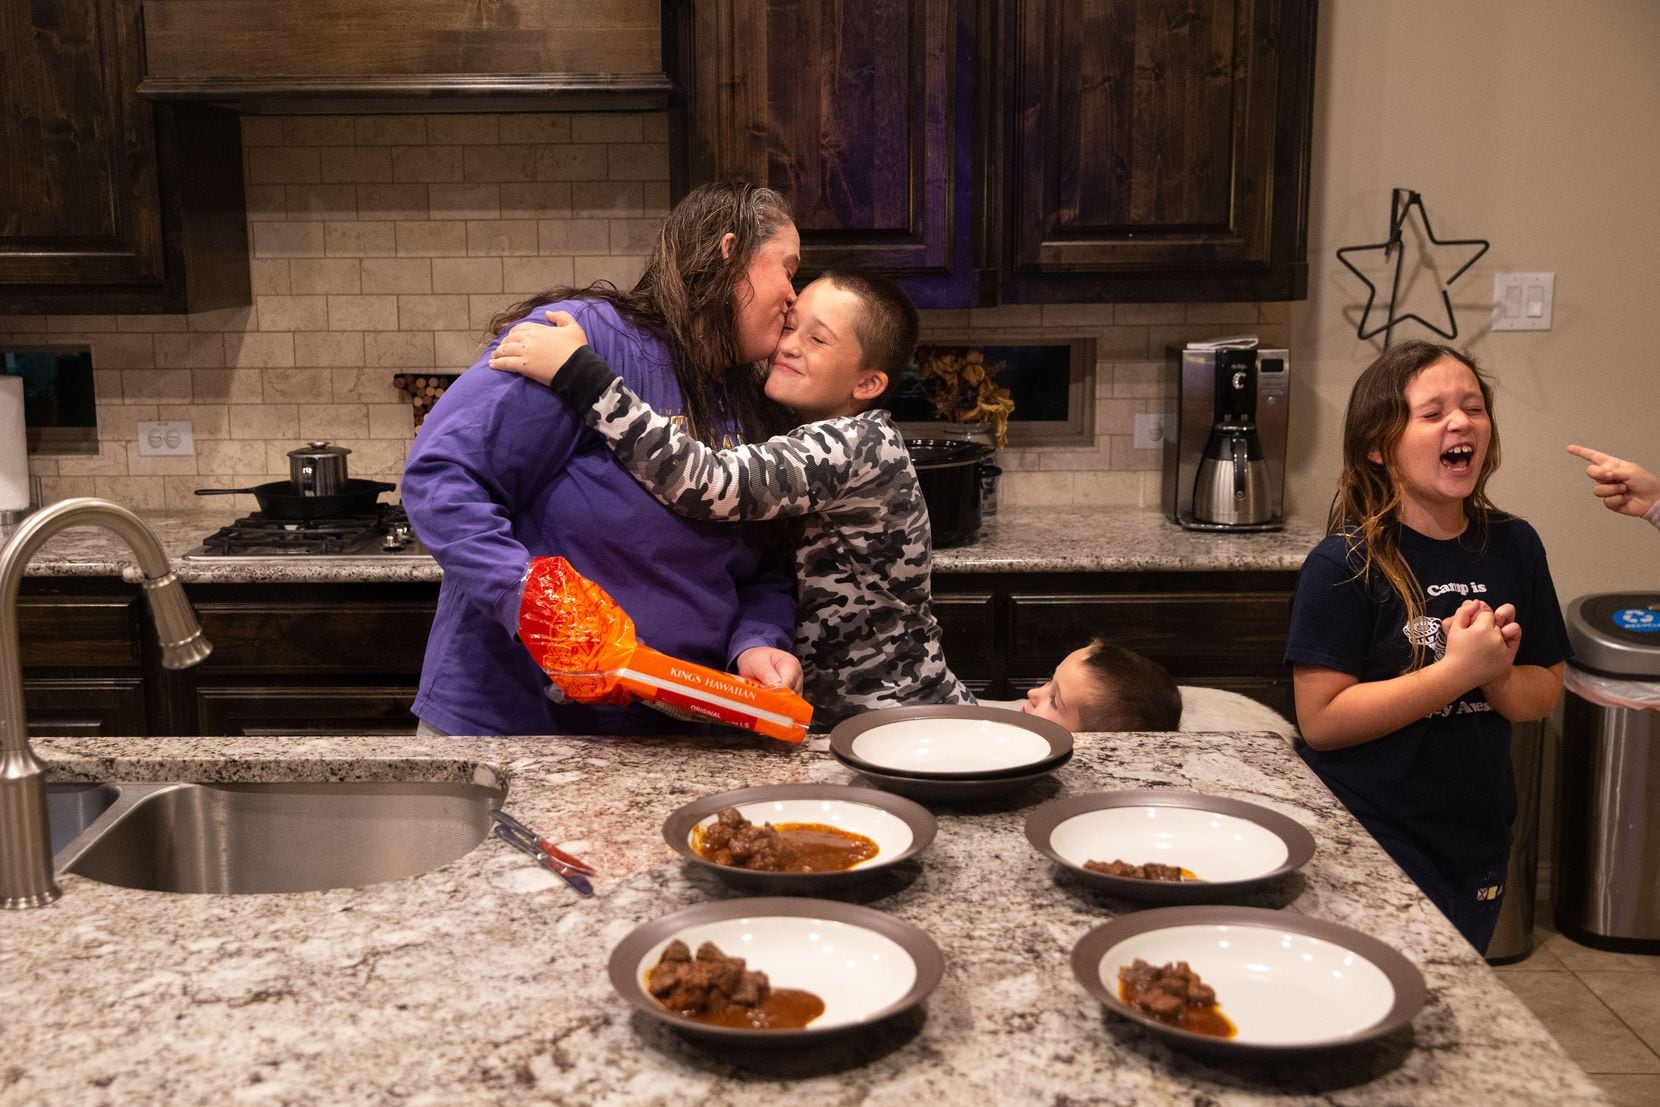 Samantha Rowley kisses her 9-year-old son, Emery, as Jaxson, 4, and Emily, 8, line up for hugs just before dinnertime at the family's home in Frisco. On many nights, Rowley makes it home from work not long before her four children's bedtime.